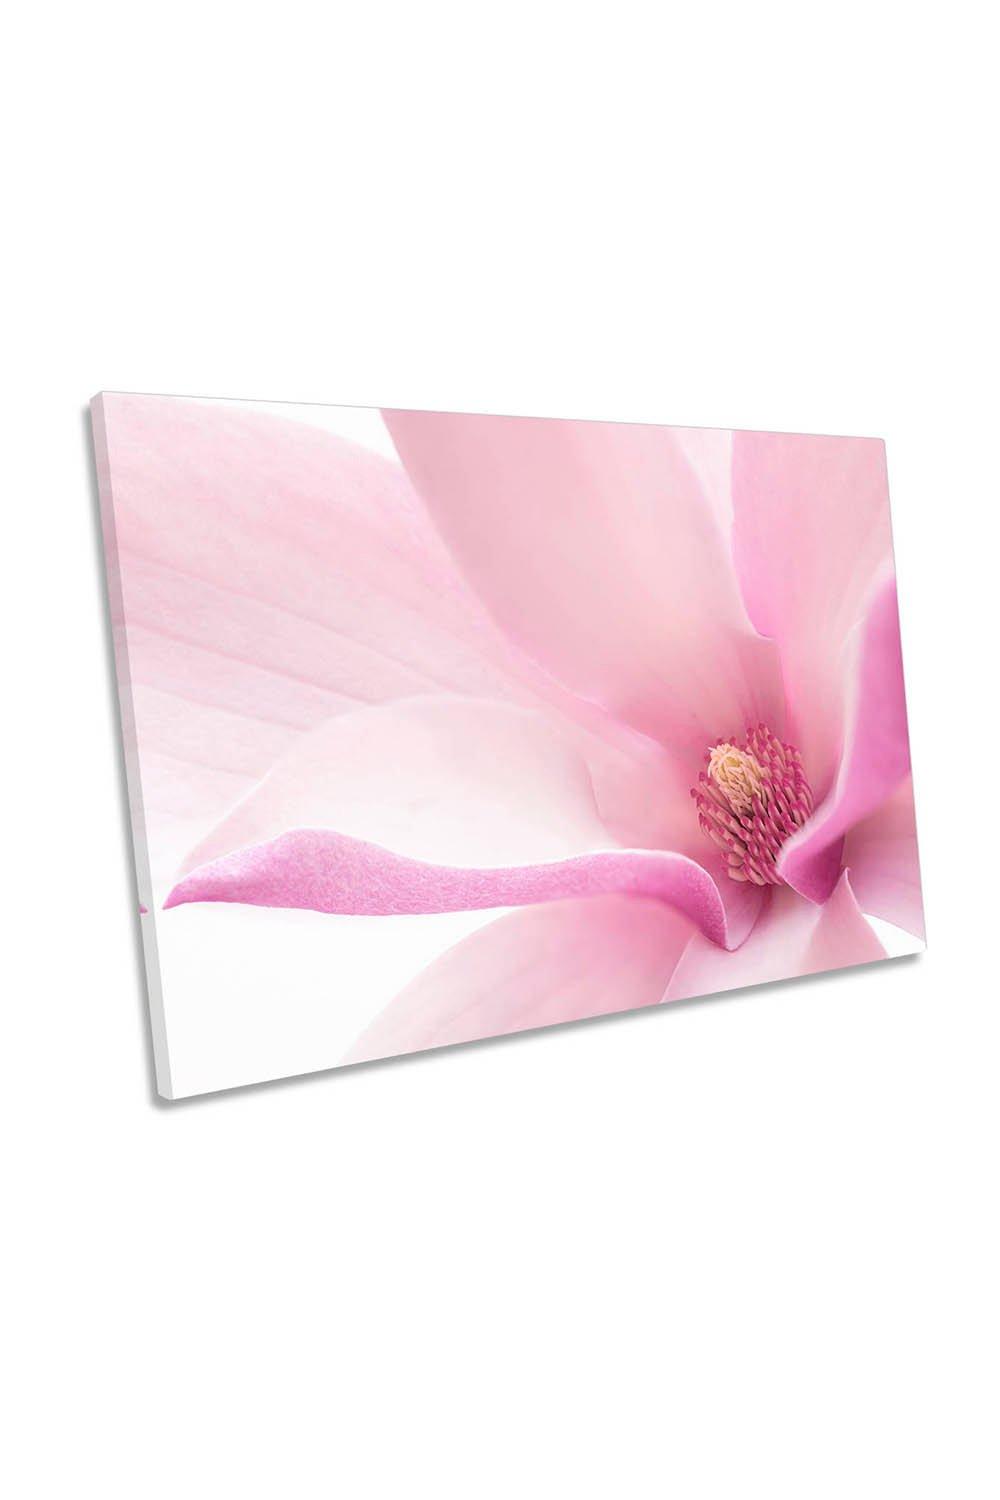 Pink Magnolia Flower Floral Canvas Wall Art Picture Print